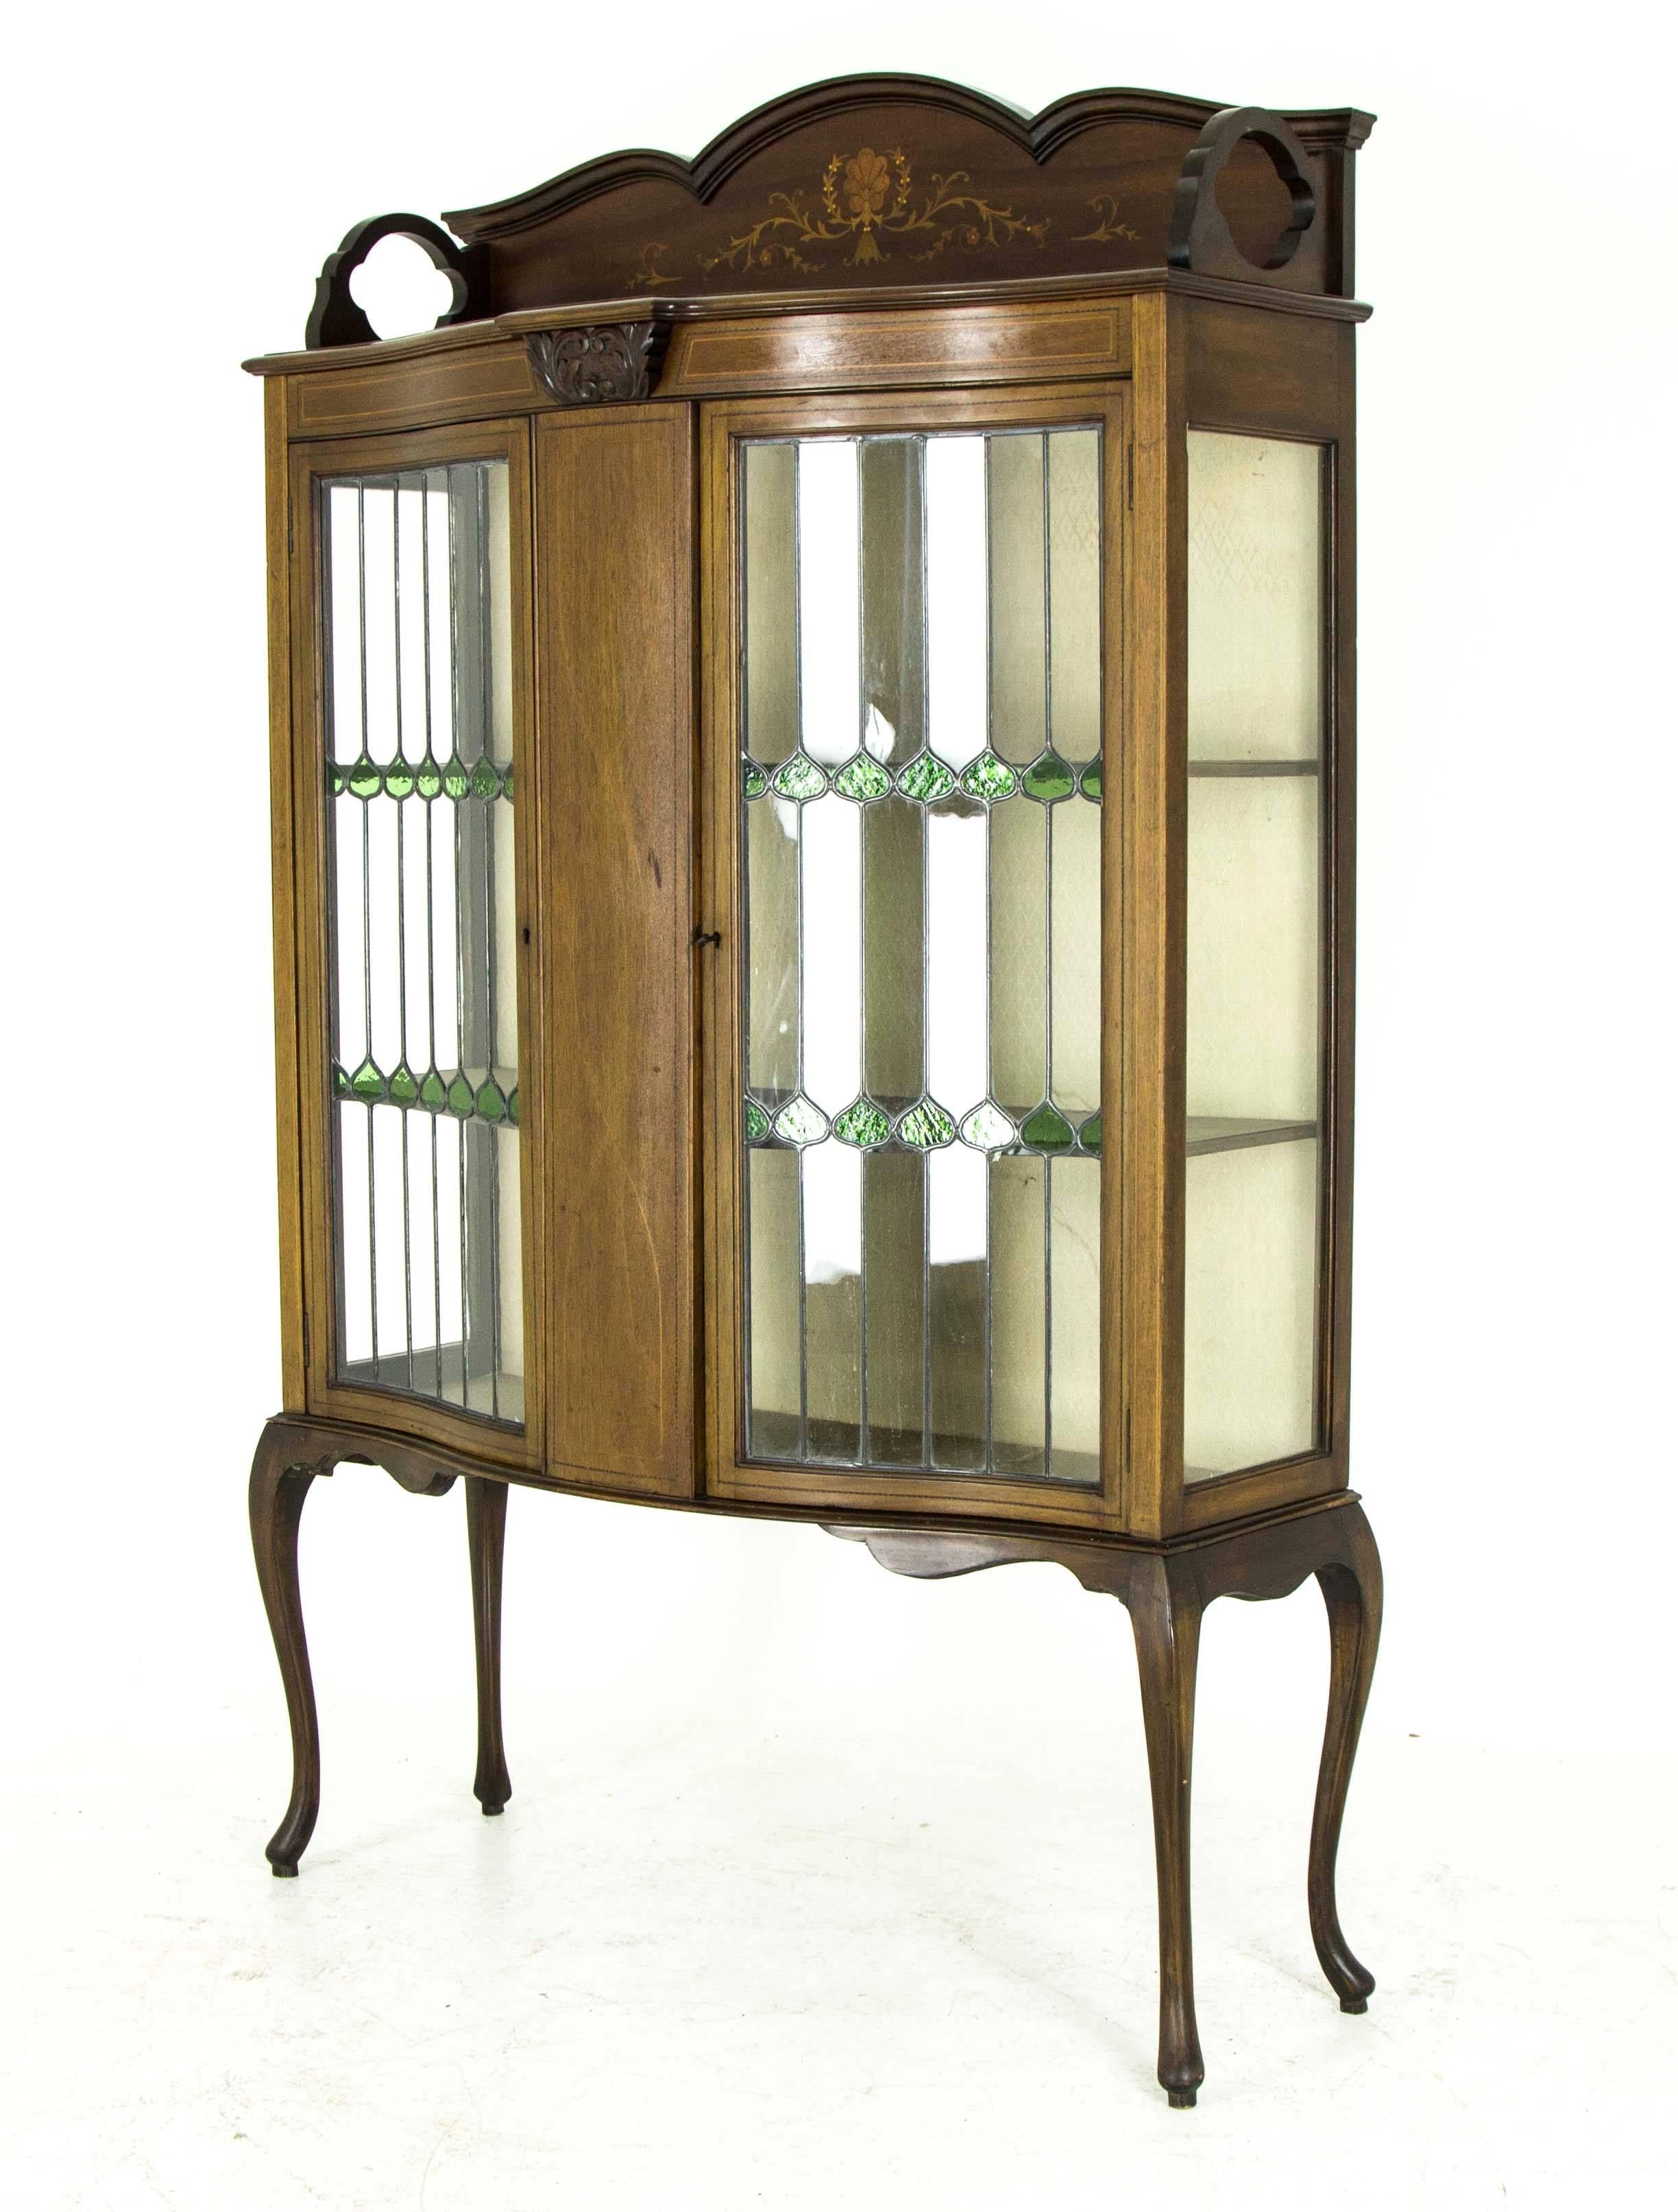 Scotland
1910
All original finish
Three quarter inlaid gallery above
serpentine front with central inlaid panel
flanked by a pair of stained glass doors
with two fixed shelves inside
fabric back and fabric shelves
fnding on very tall, shaped